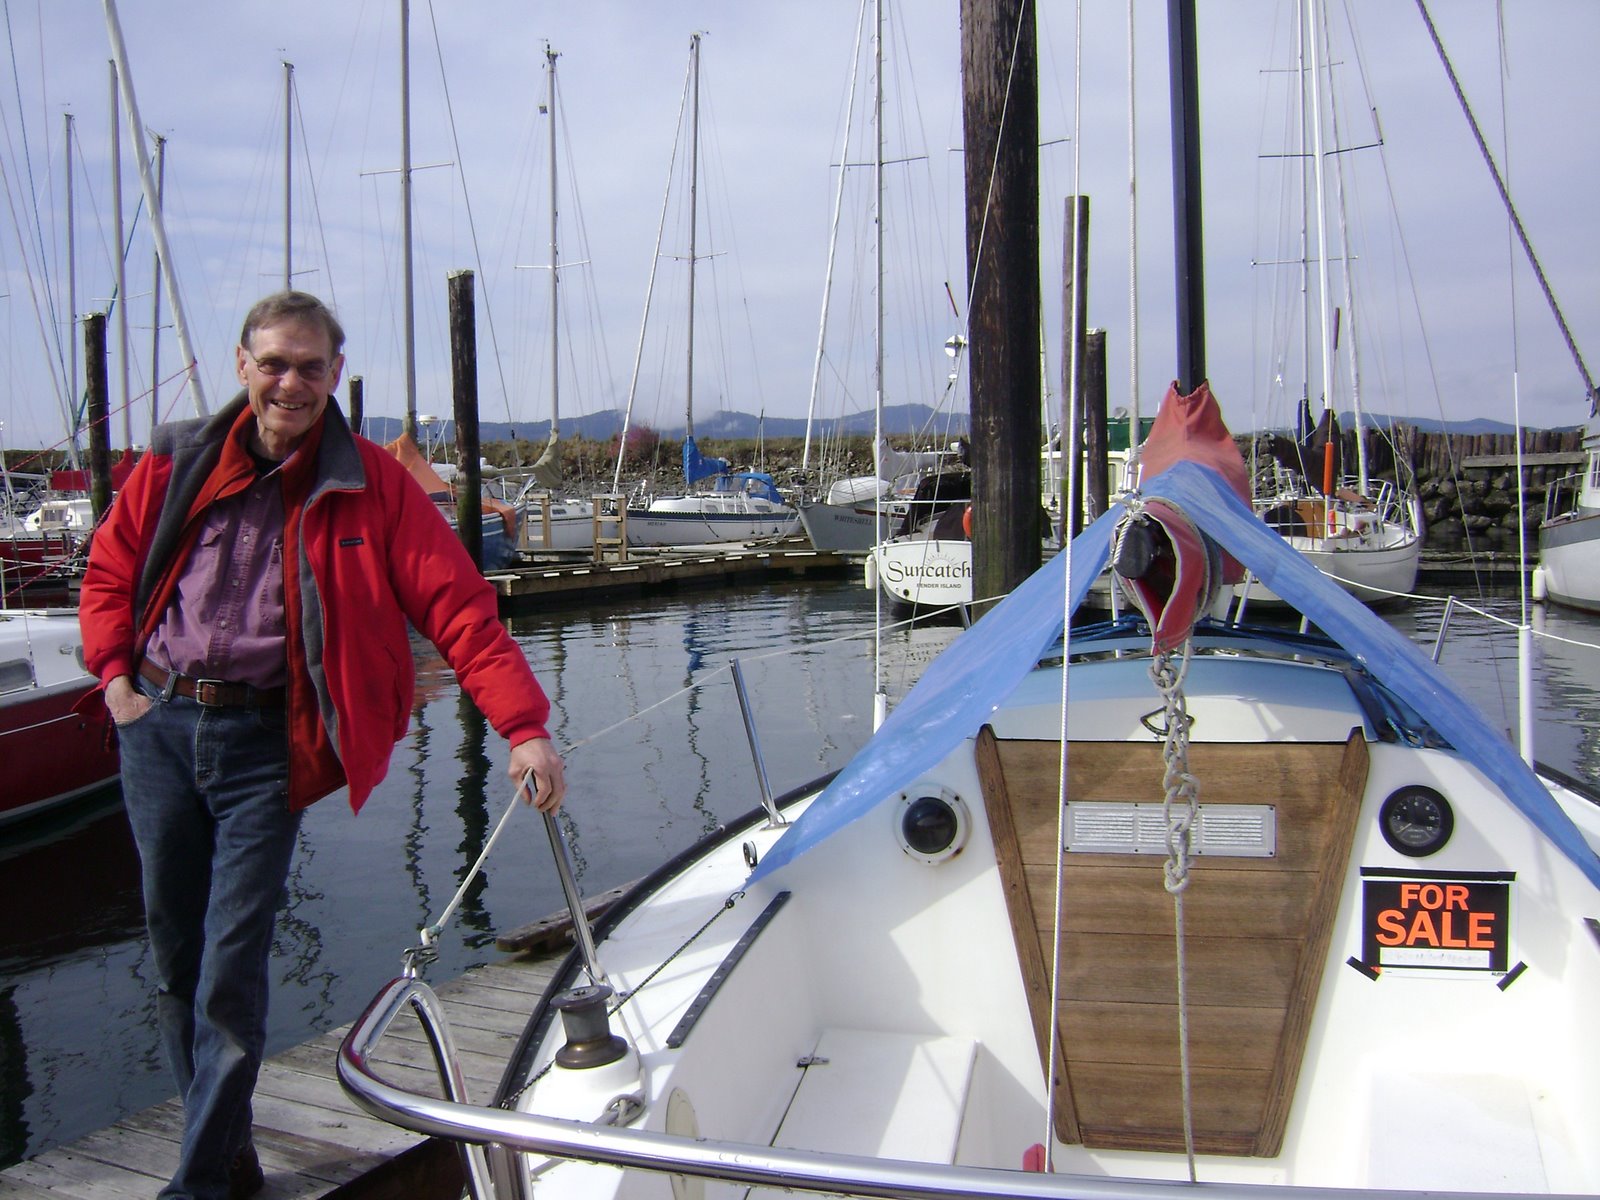 Garney inspects boat for sale at Thieves Marina